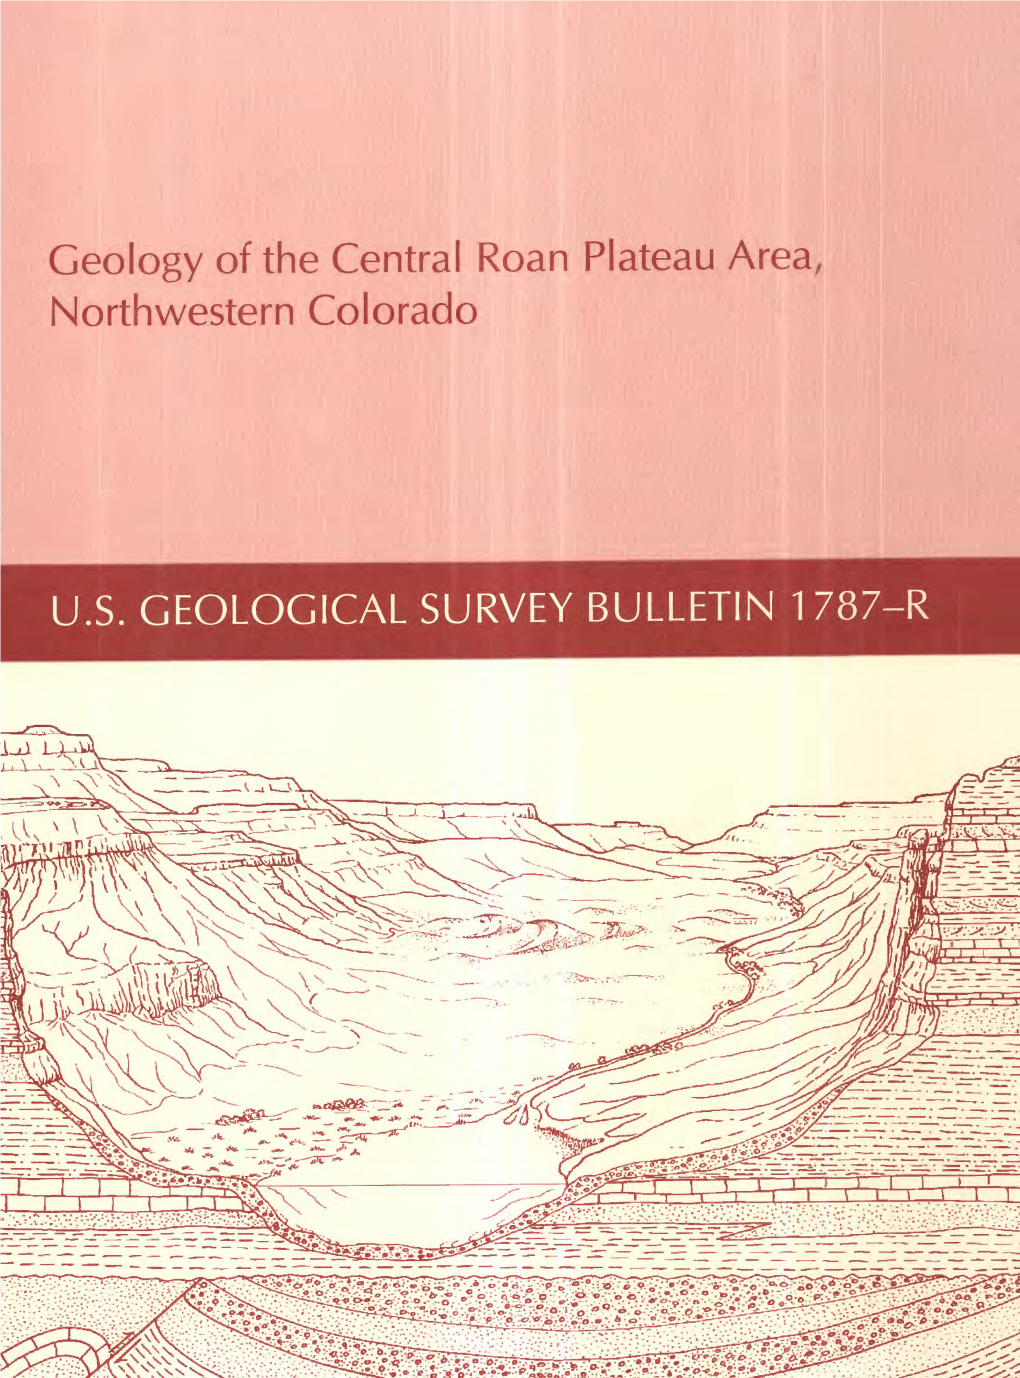 Geology of the Central Roan Plateau Area, Northwestern Colorado